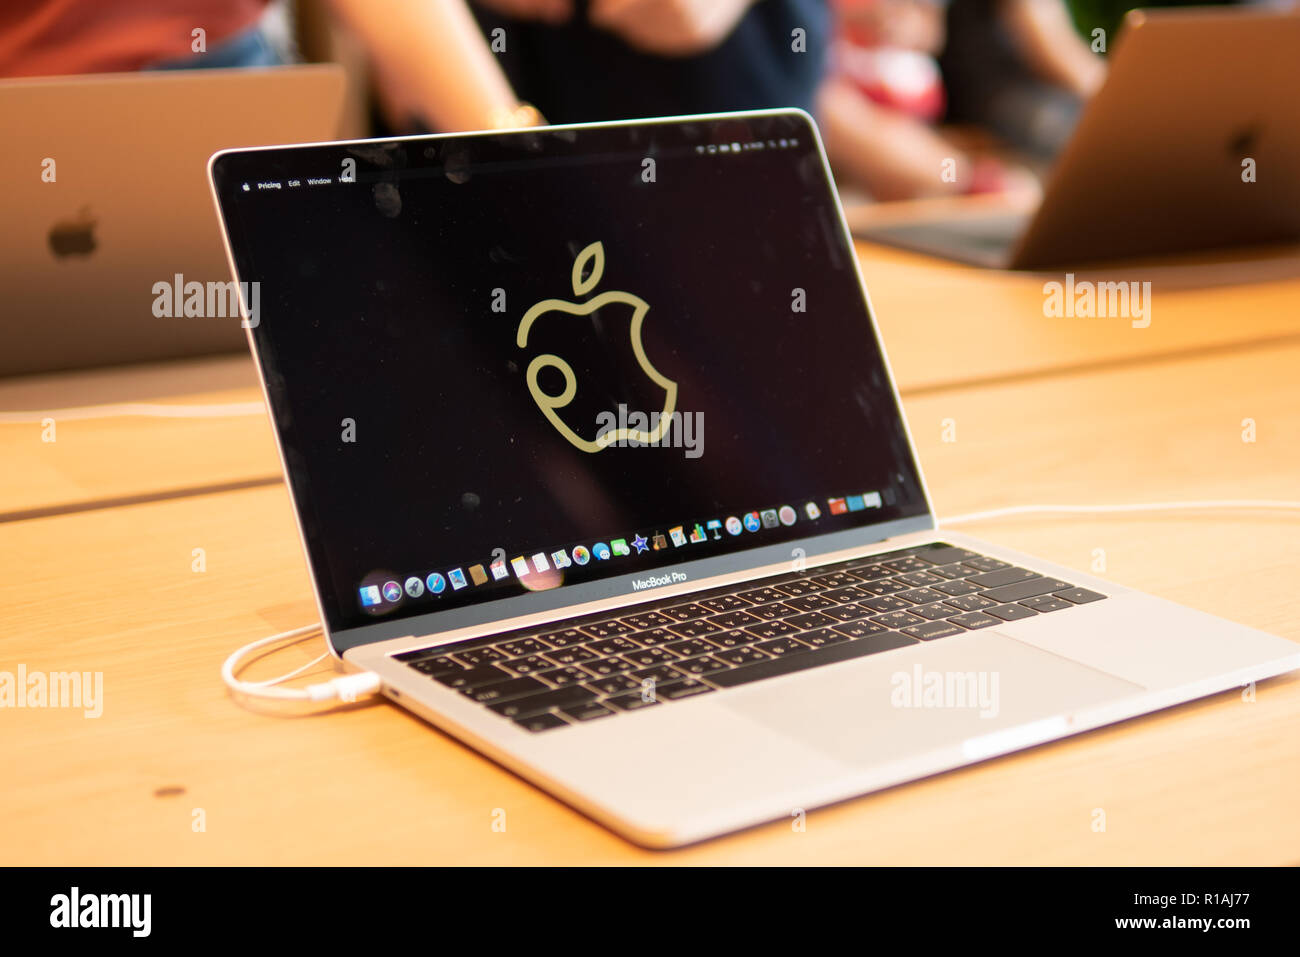 Logo of Apple Inc. on a Apple store in Iconsiam shopping mall in Bangkok,  Thailand Stock Photo - Alamy